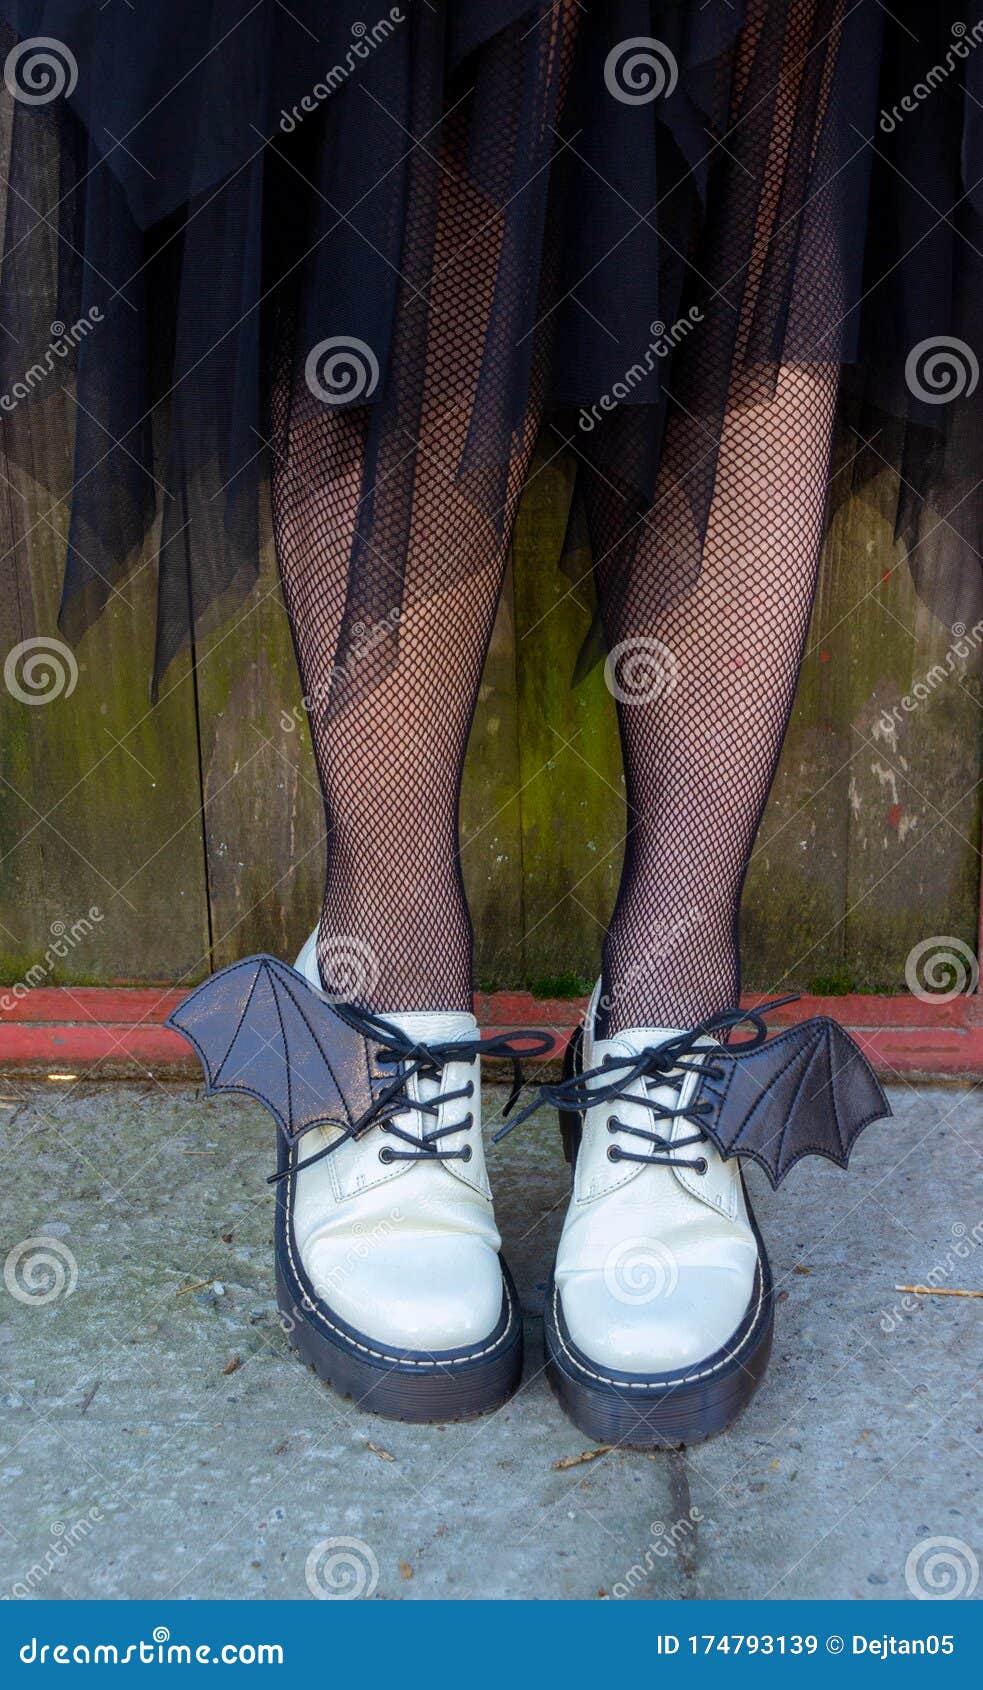 Women Legs in Gothic Style Shoes Stock Image - Image of female, catalog ...